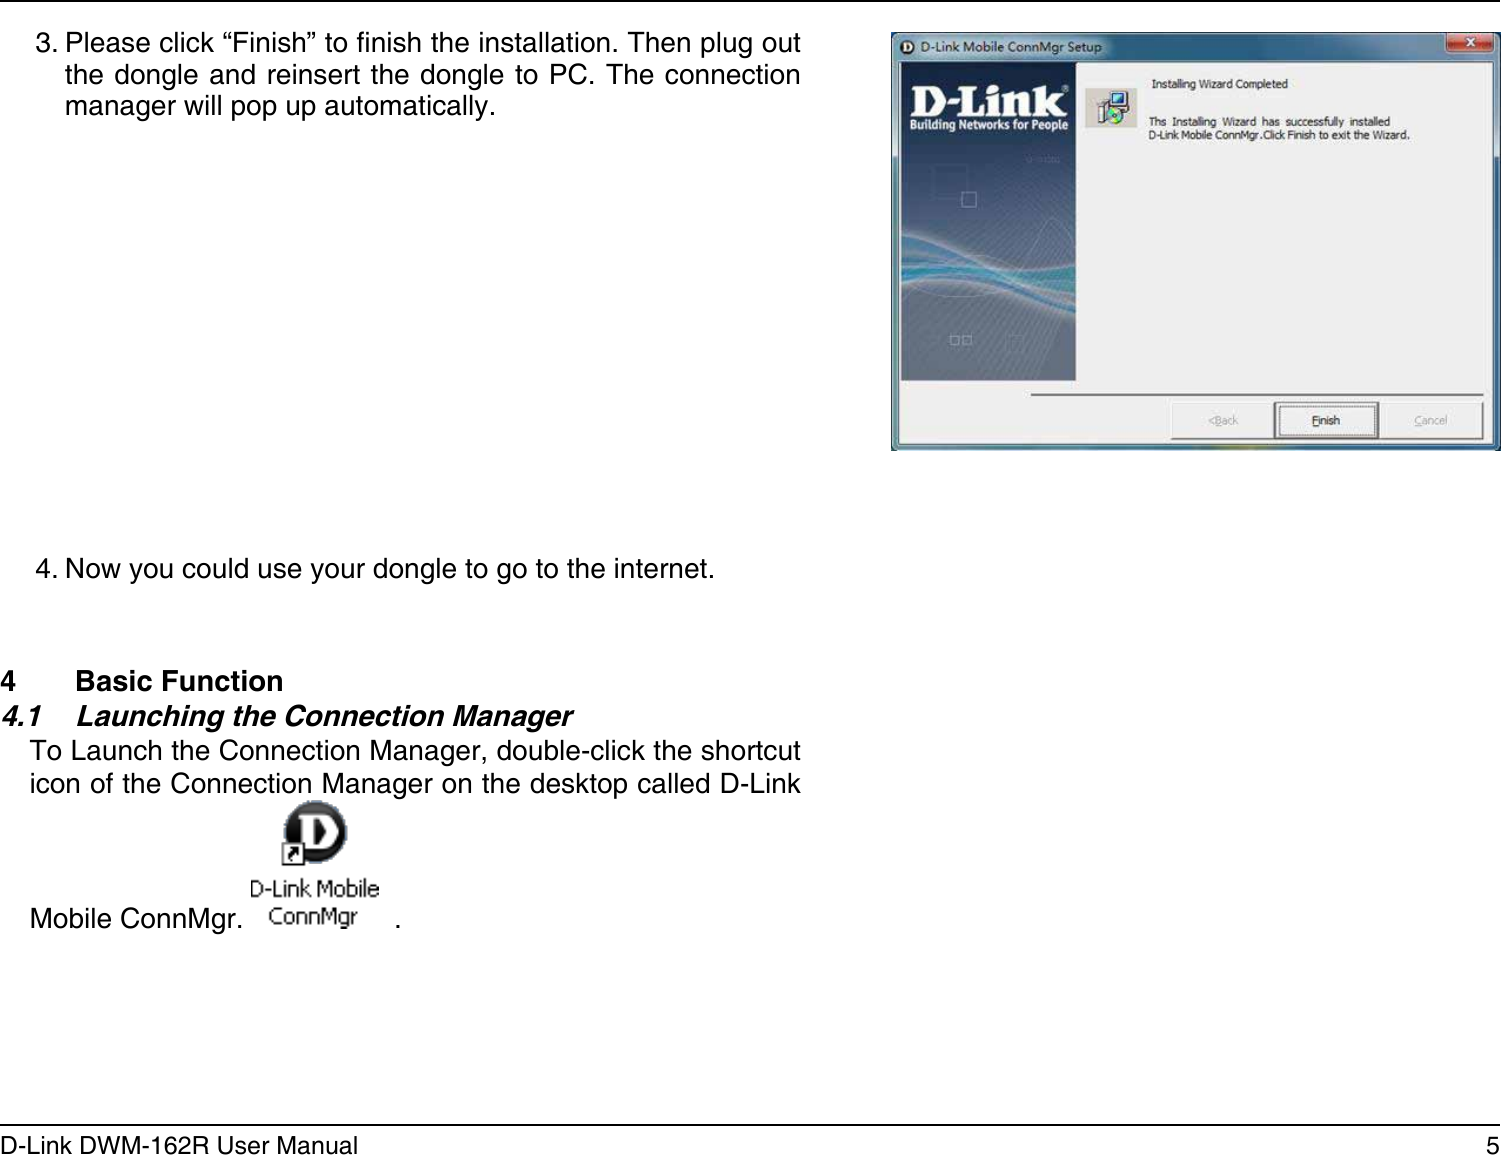 5D-Link DWM-162R User ManualSection 2 - Installation4  Basic Function4.1  Launching the Connection ManagerTo Launch the Connection Manager, double-click the shortcut icon of the Connection Manager on the desktop called D-Link Mobile ConnMgr.    .4. Now you could use your dongle to go to the internet.3. Please click “Finish” to nish the installation. Then plug out the dongle and reinsert the dongle to PC. The connection manager will pop up automatically.